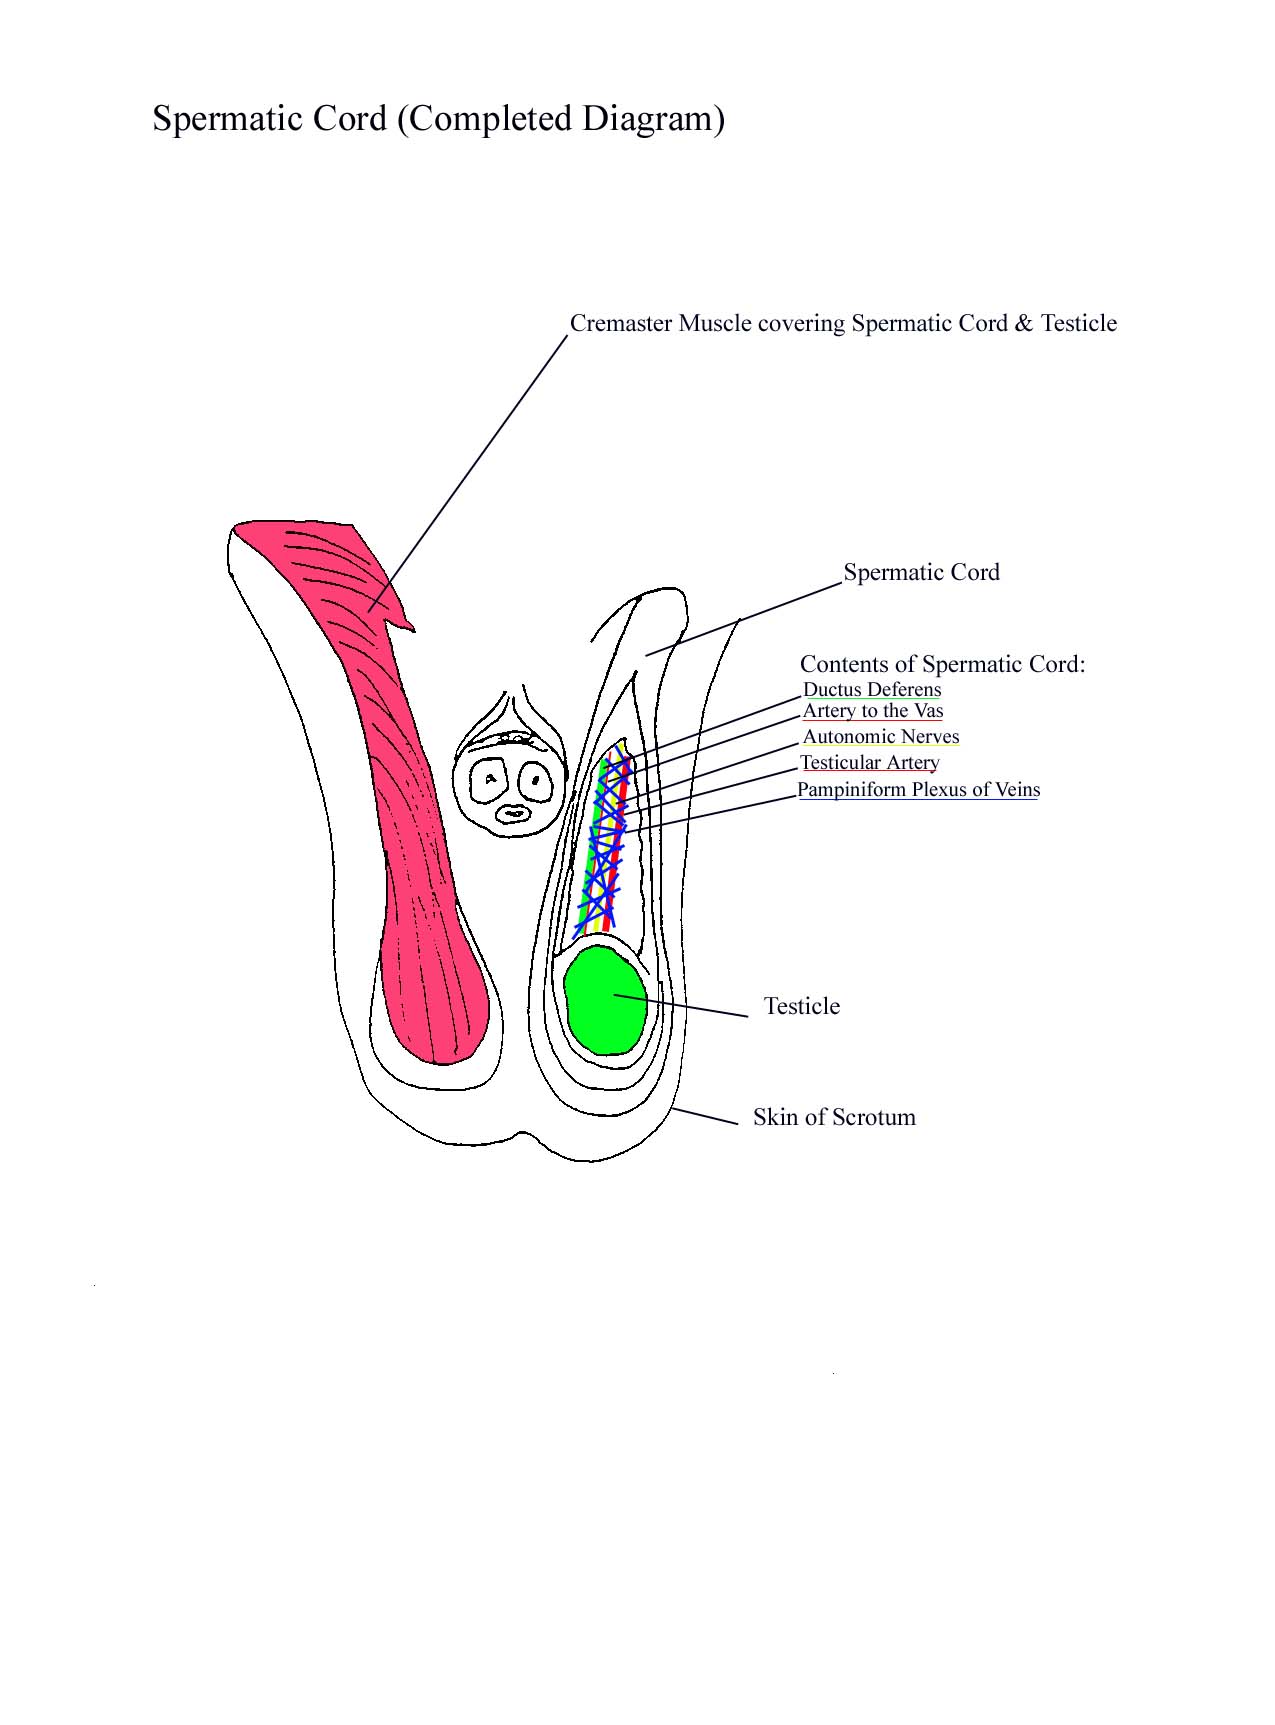 a completed diagram of the cremaster muscle and the contents of the spermatic cord